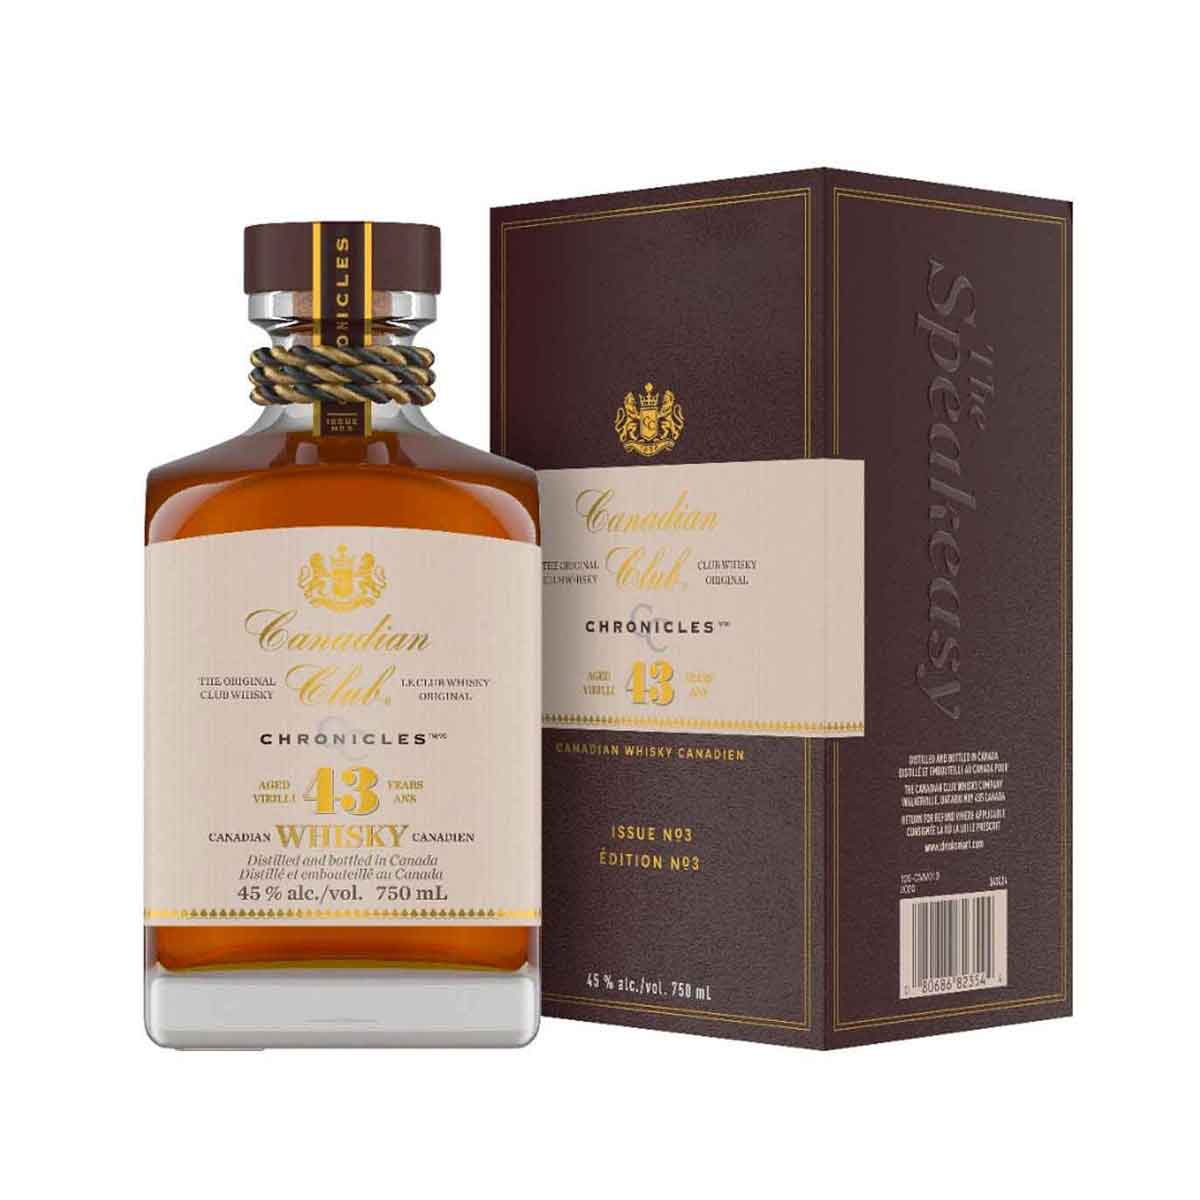 TAG Liquor Stores BC-Canadian Club Chronicles 43 Year Old Whisky 750ml